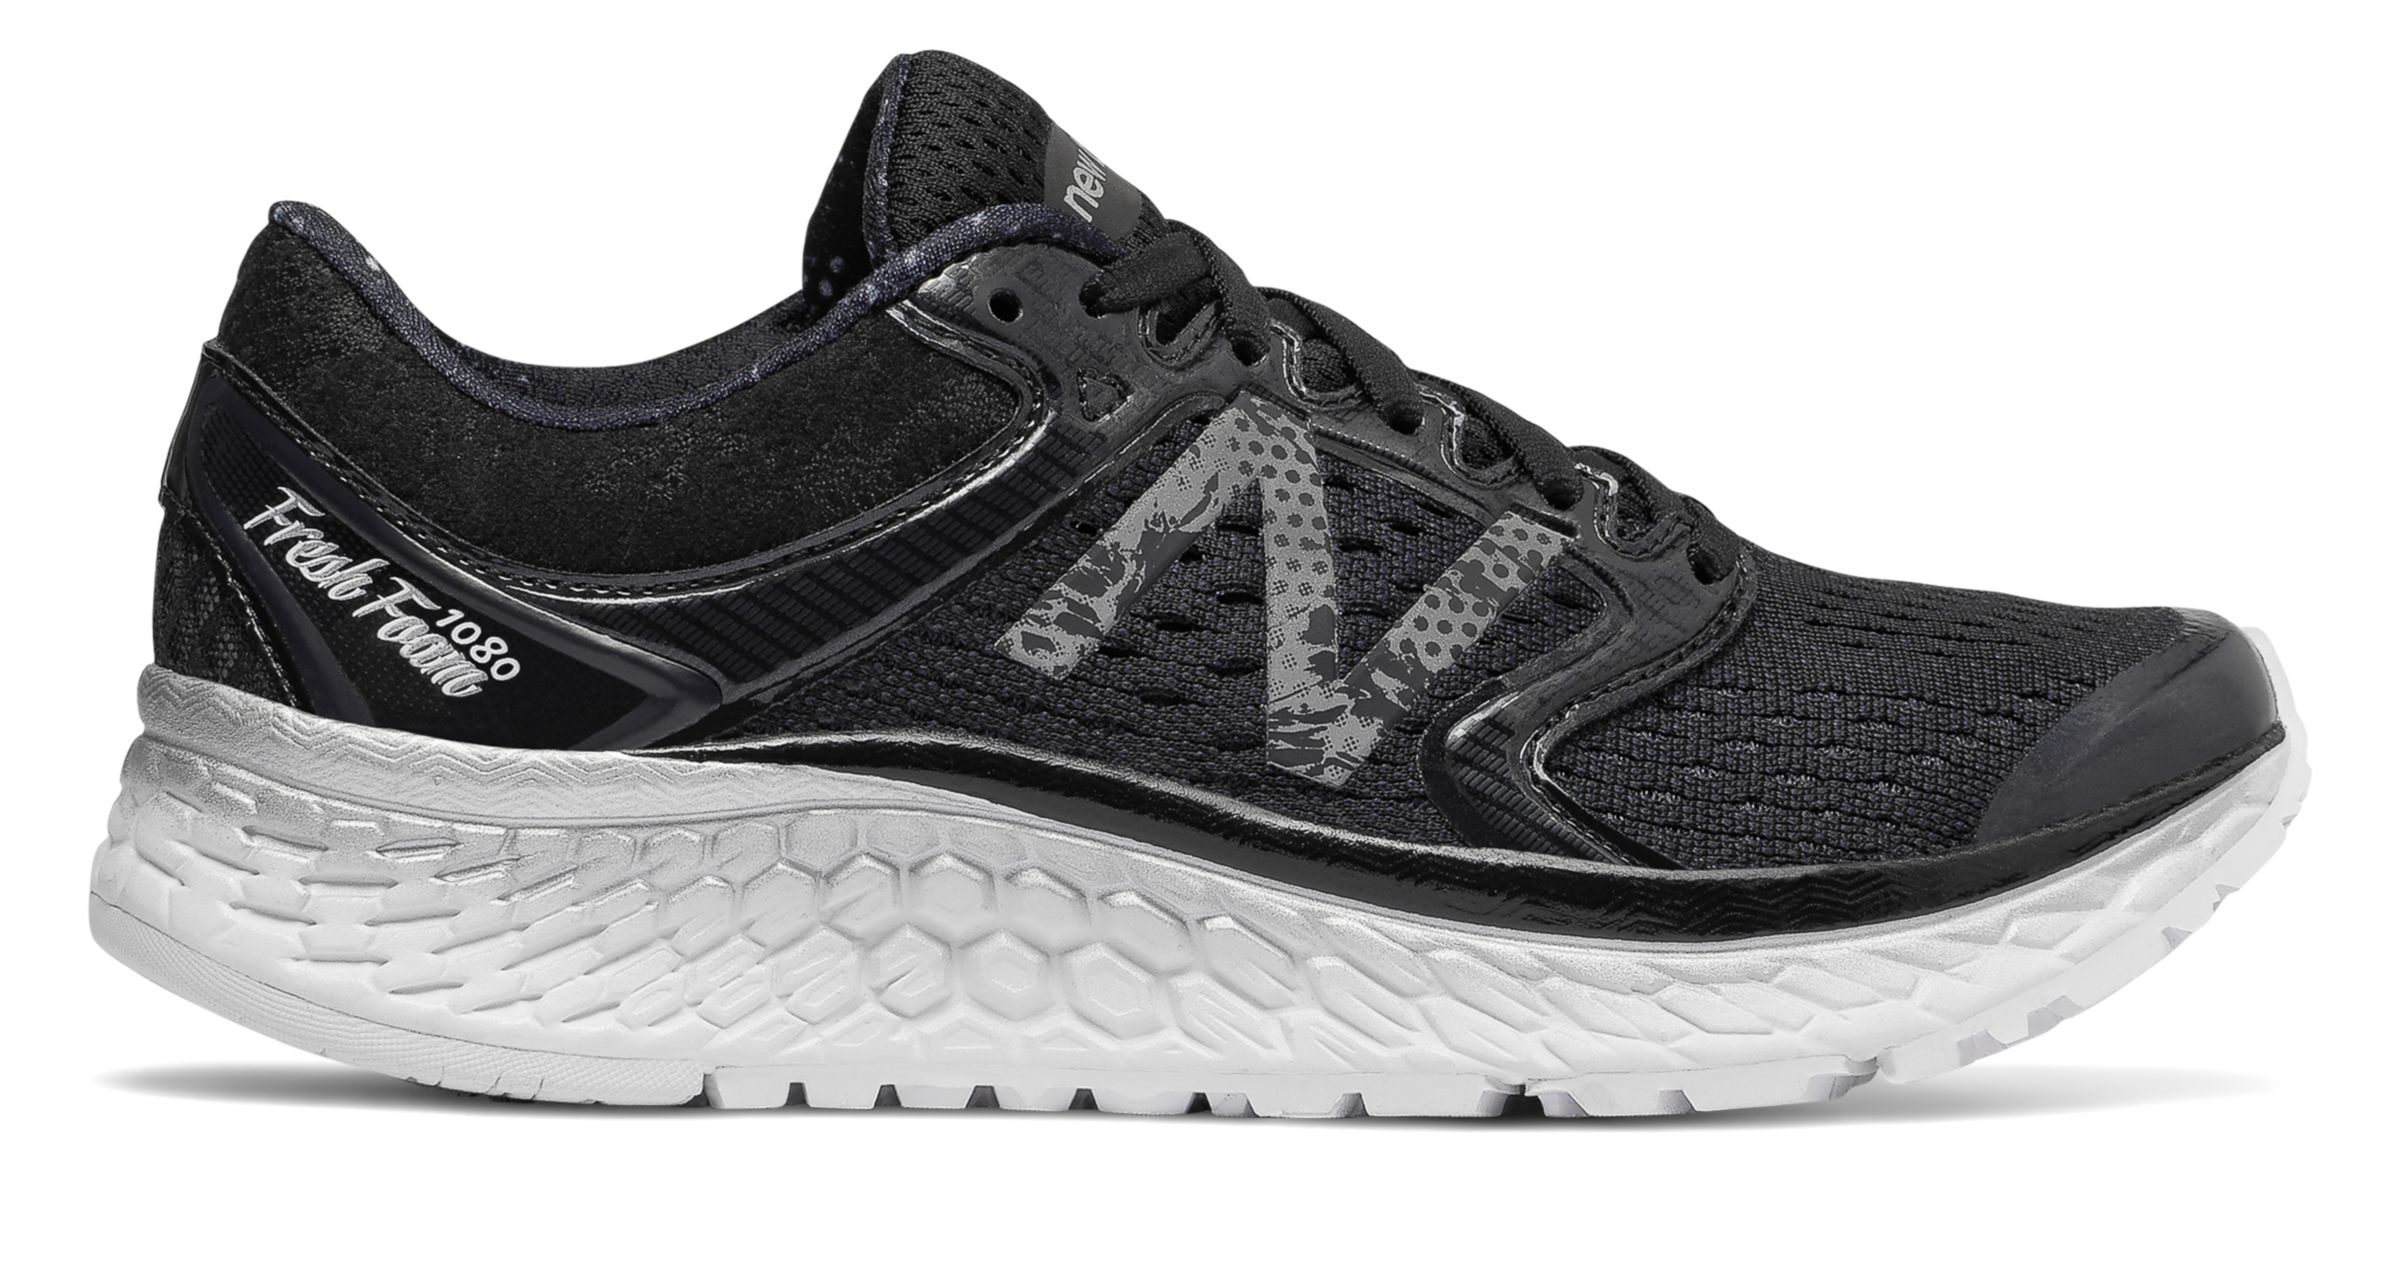 New Balance W1080-V7 on Sale - Discounts Up to 65% Off on W1080XG7 at Joe's New  Balance Outlet